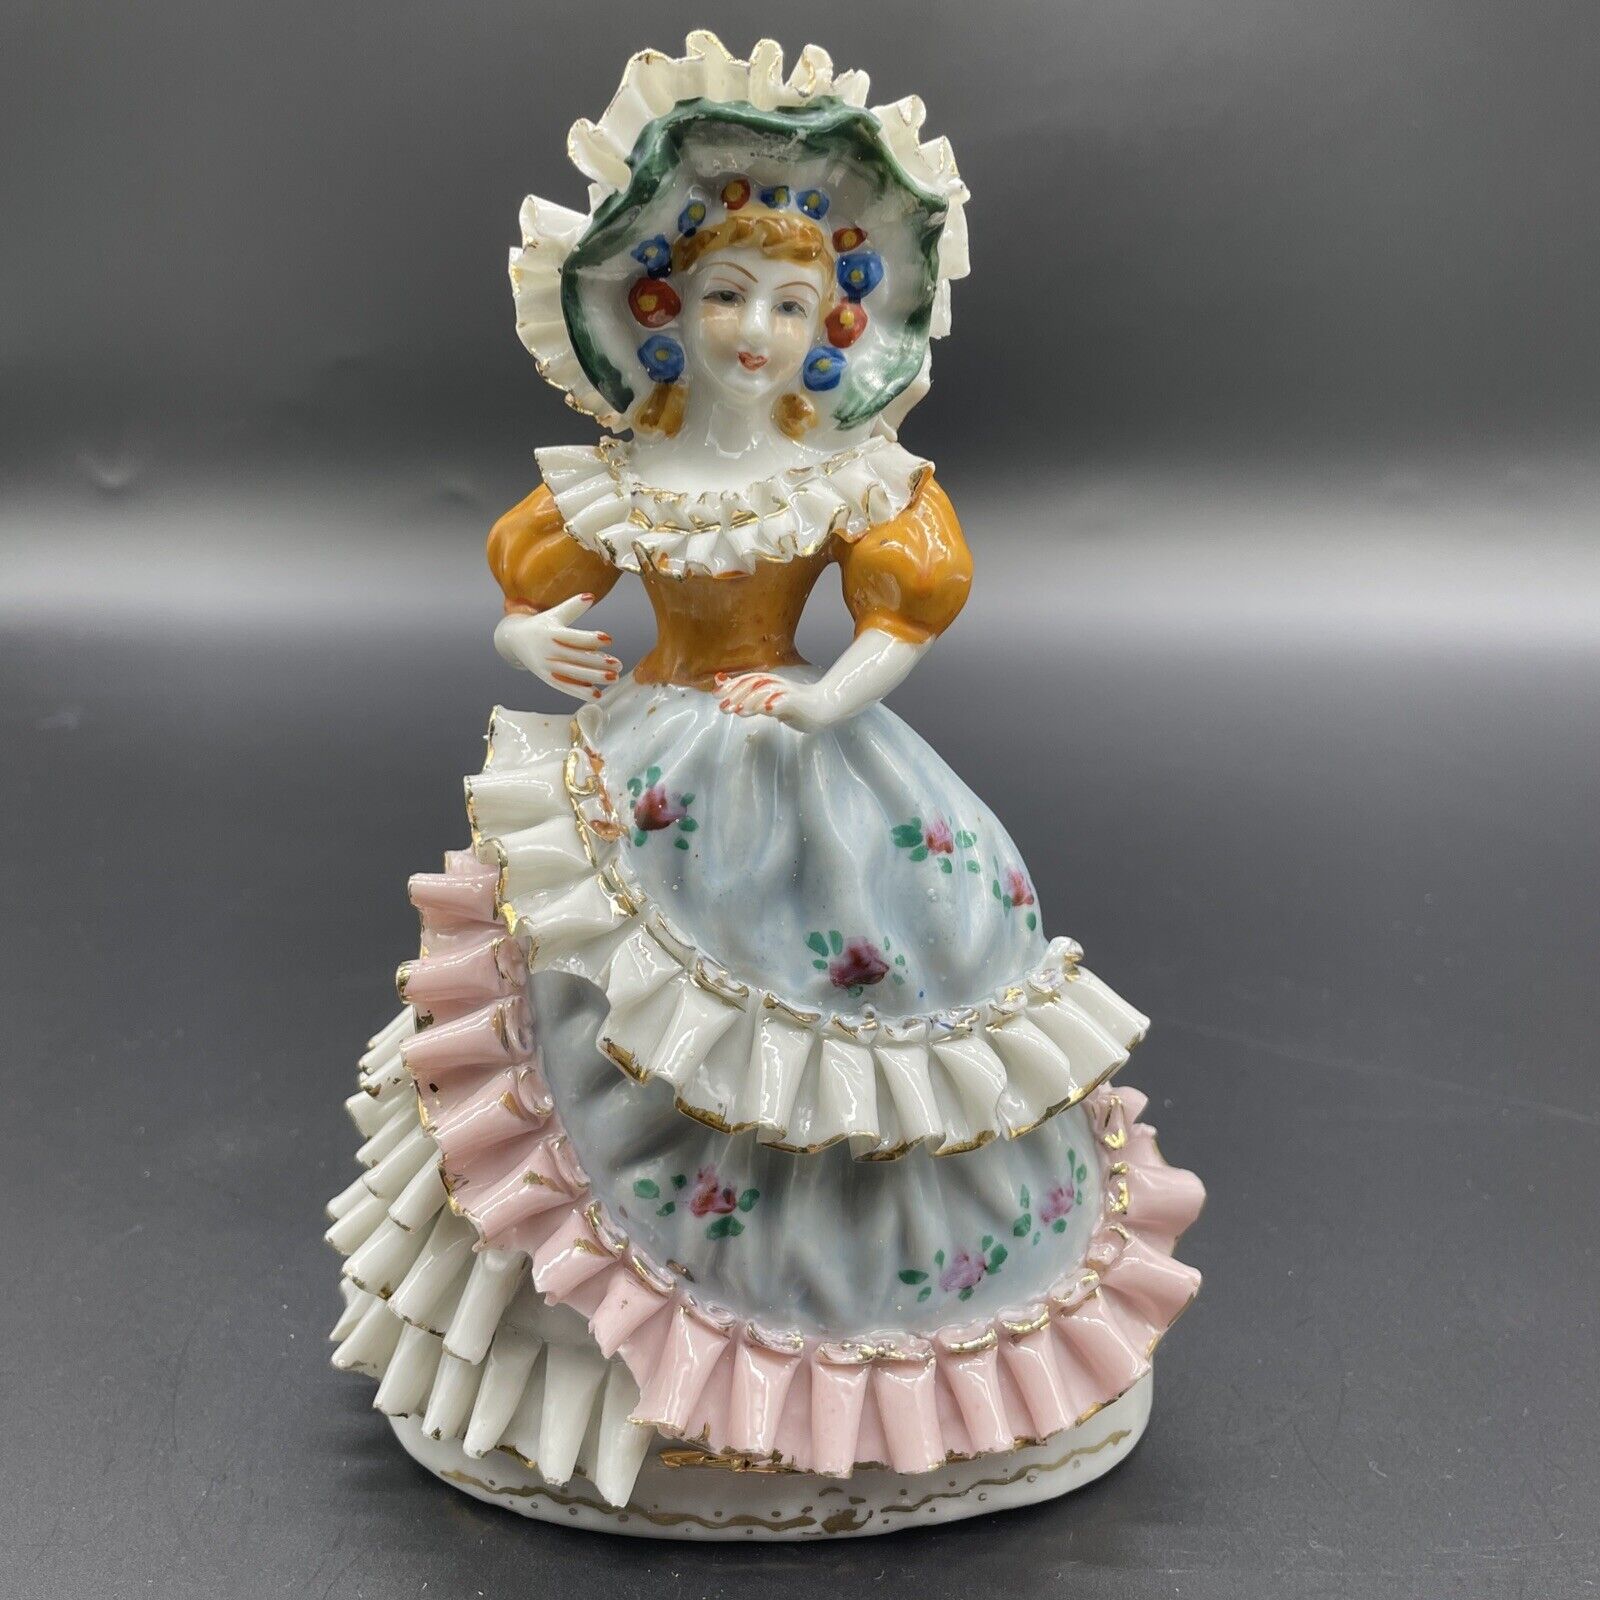 Vintage Urion Occupied Japan lady woman figurine handpainted ruffled ball gown